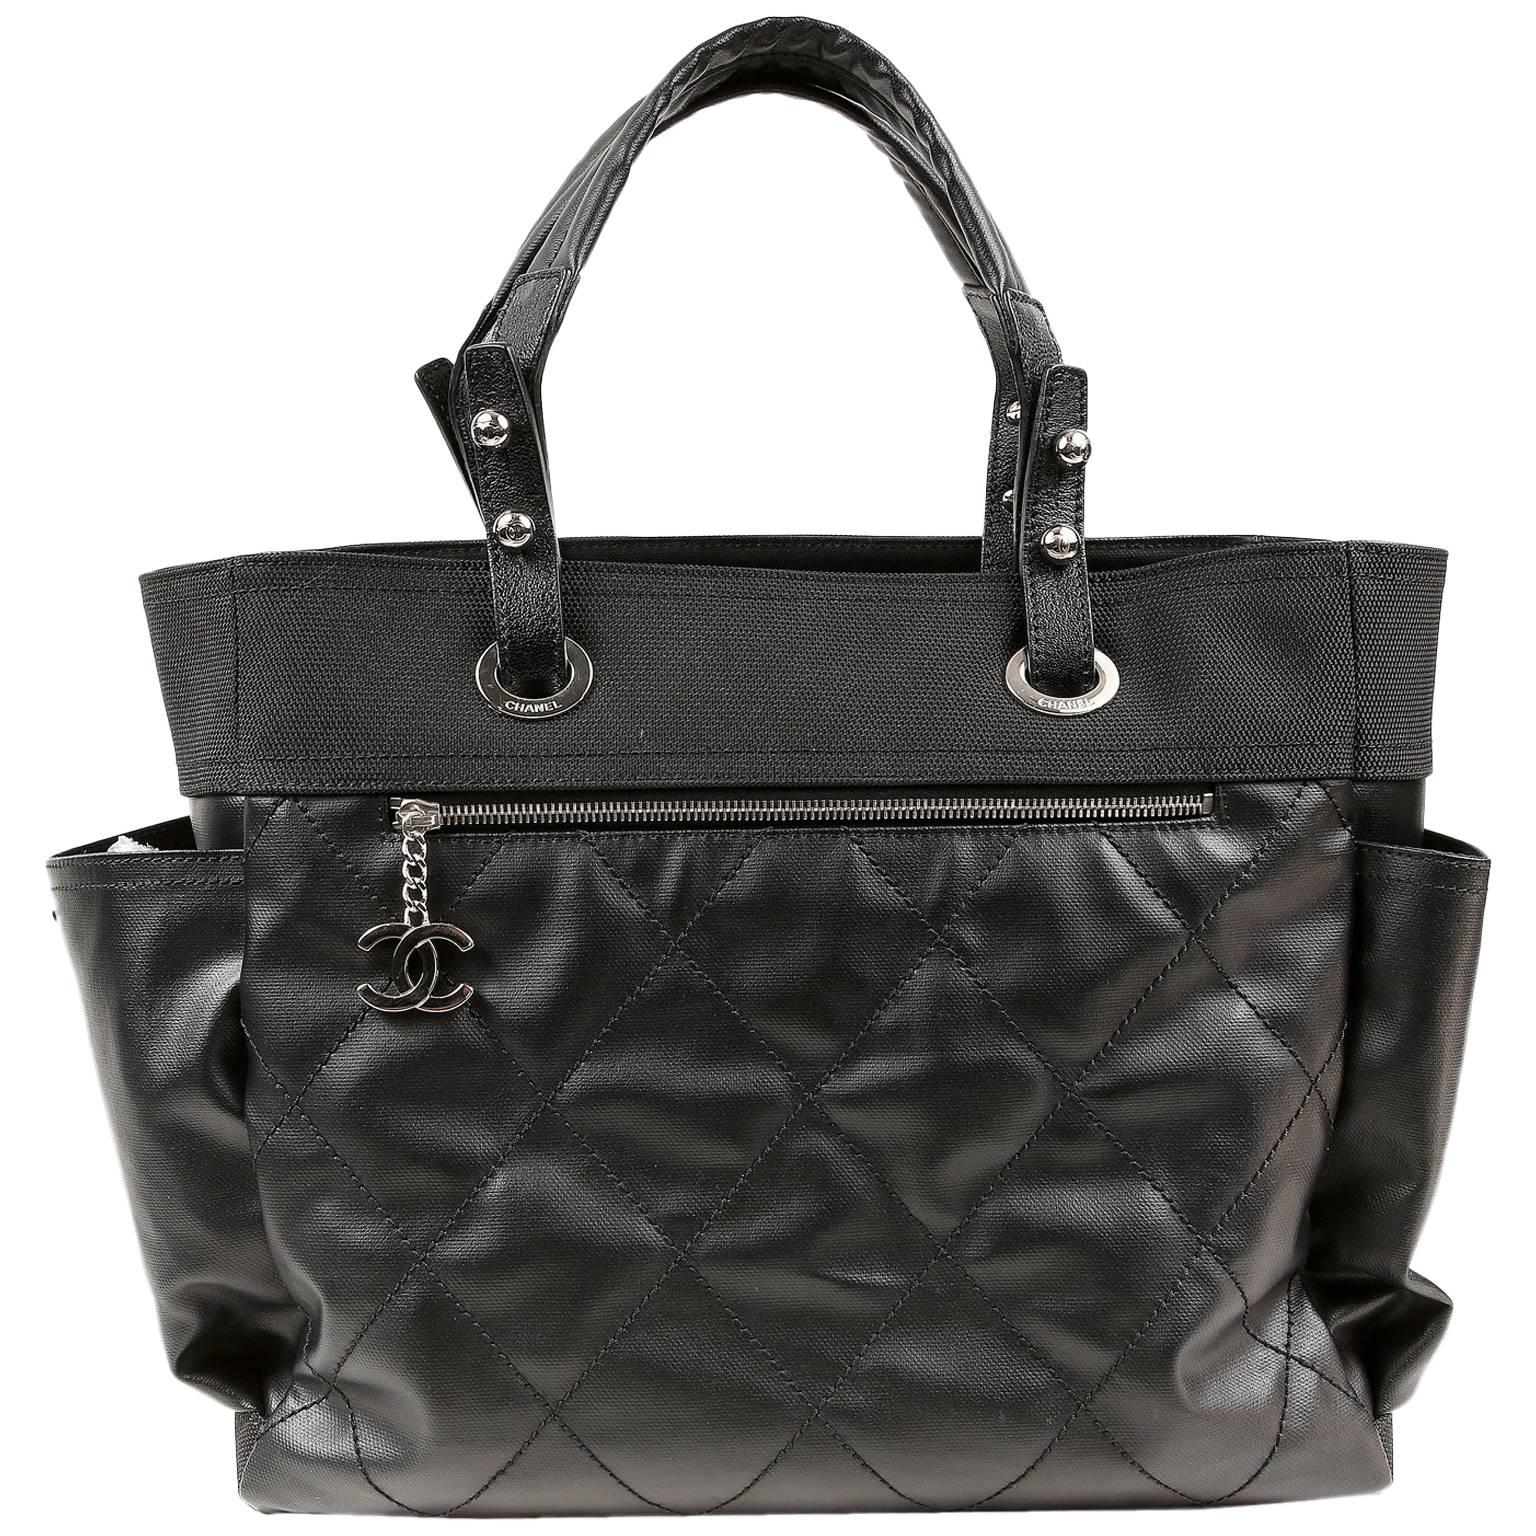 Chanel Black Canvas Biarritz XL Tote Bag For Sale